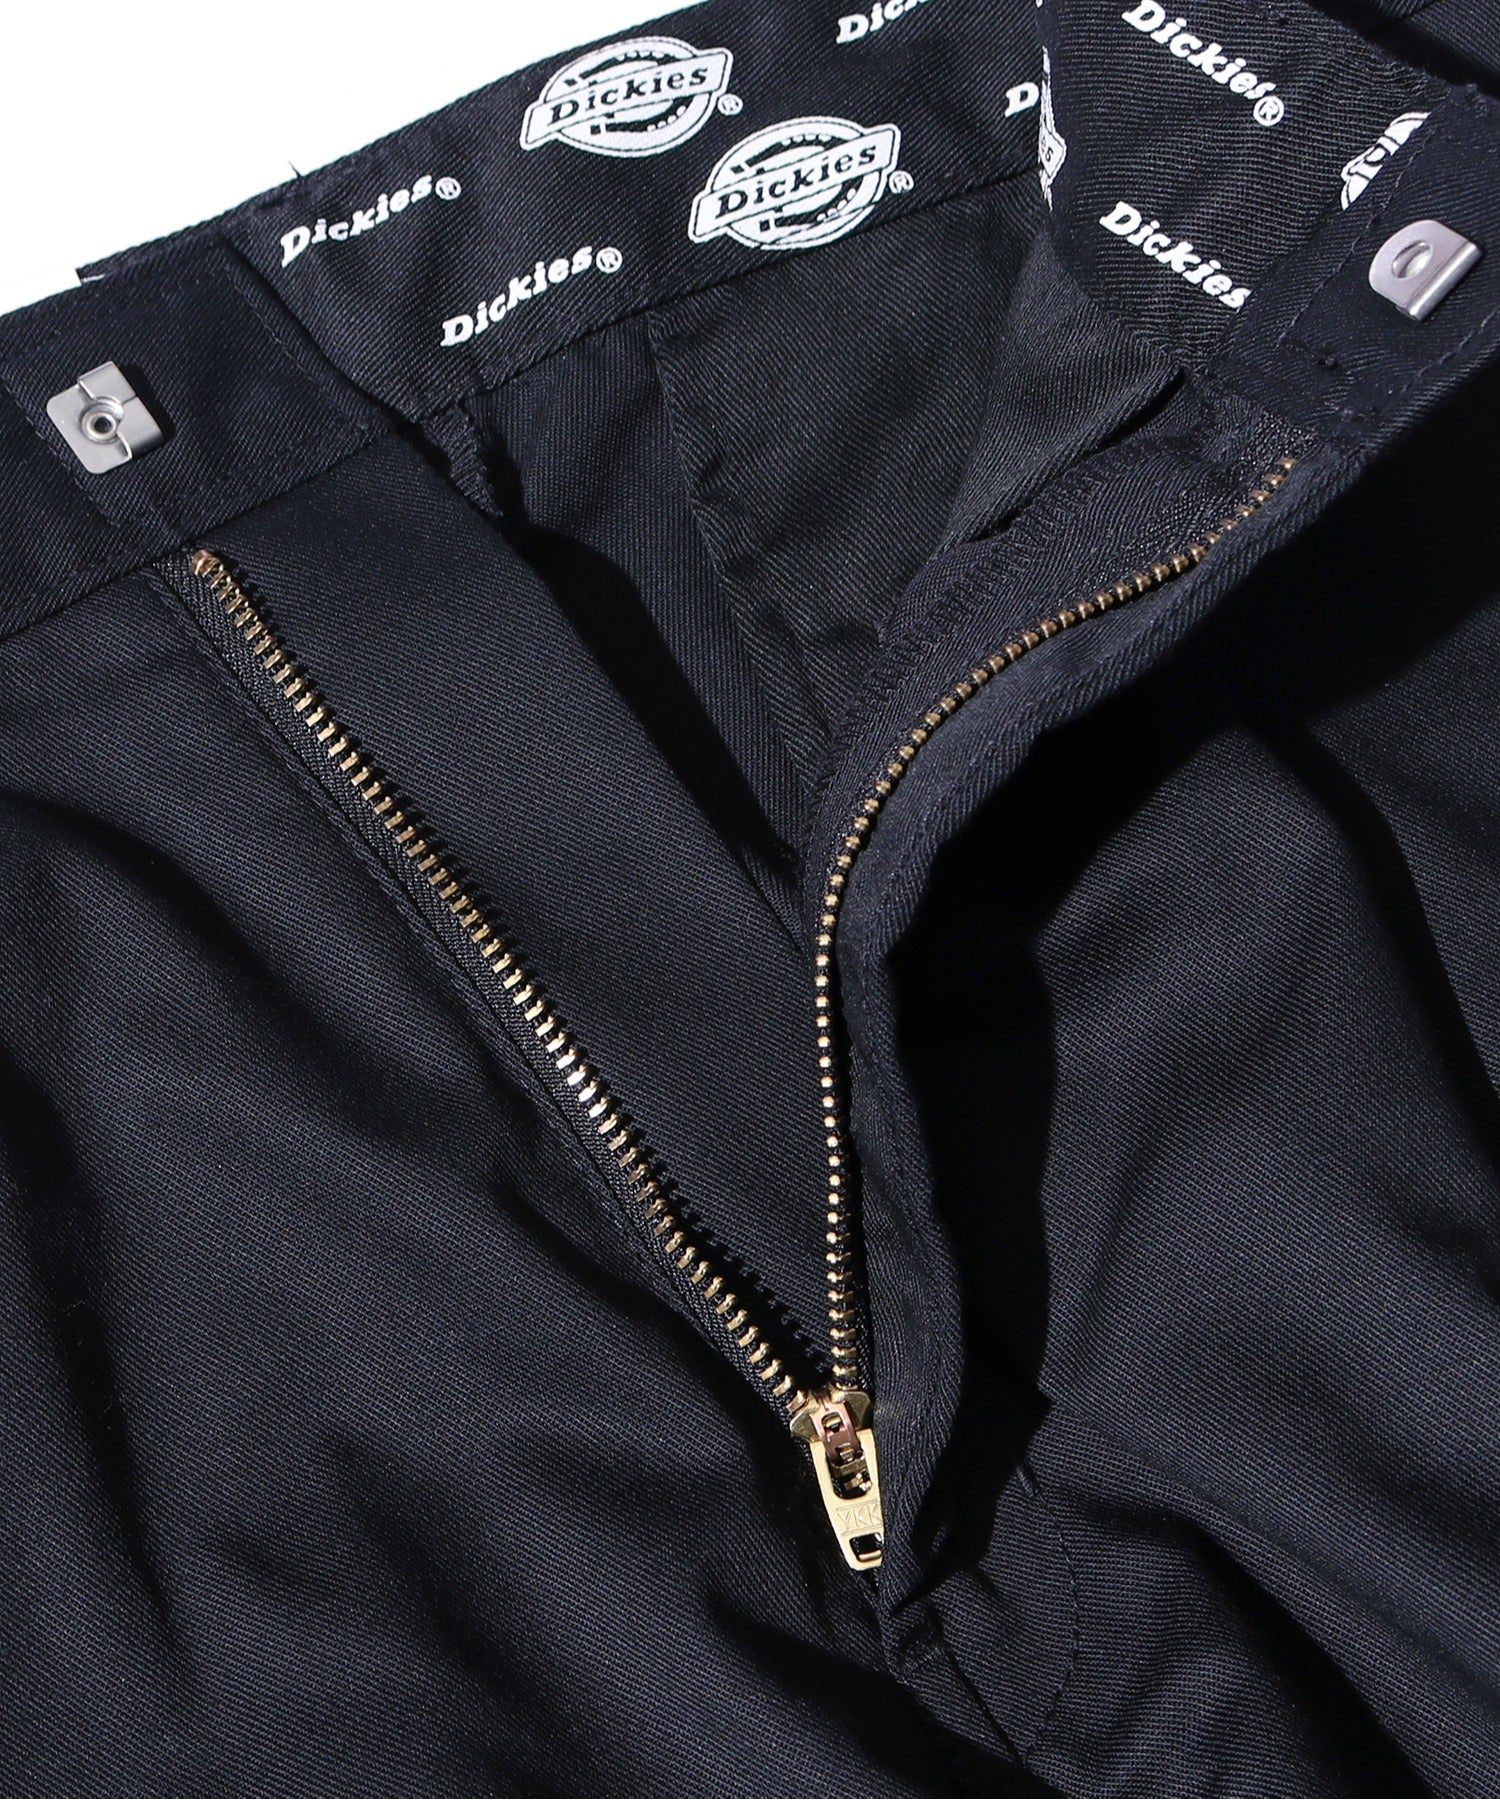 Embroidered twill tuck pants